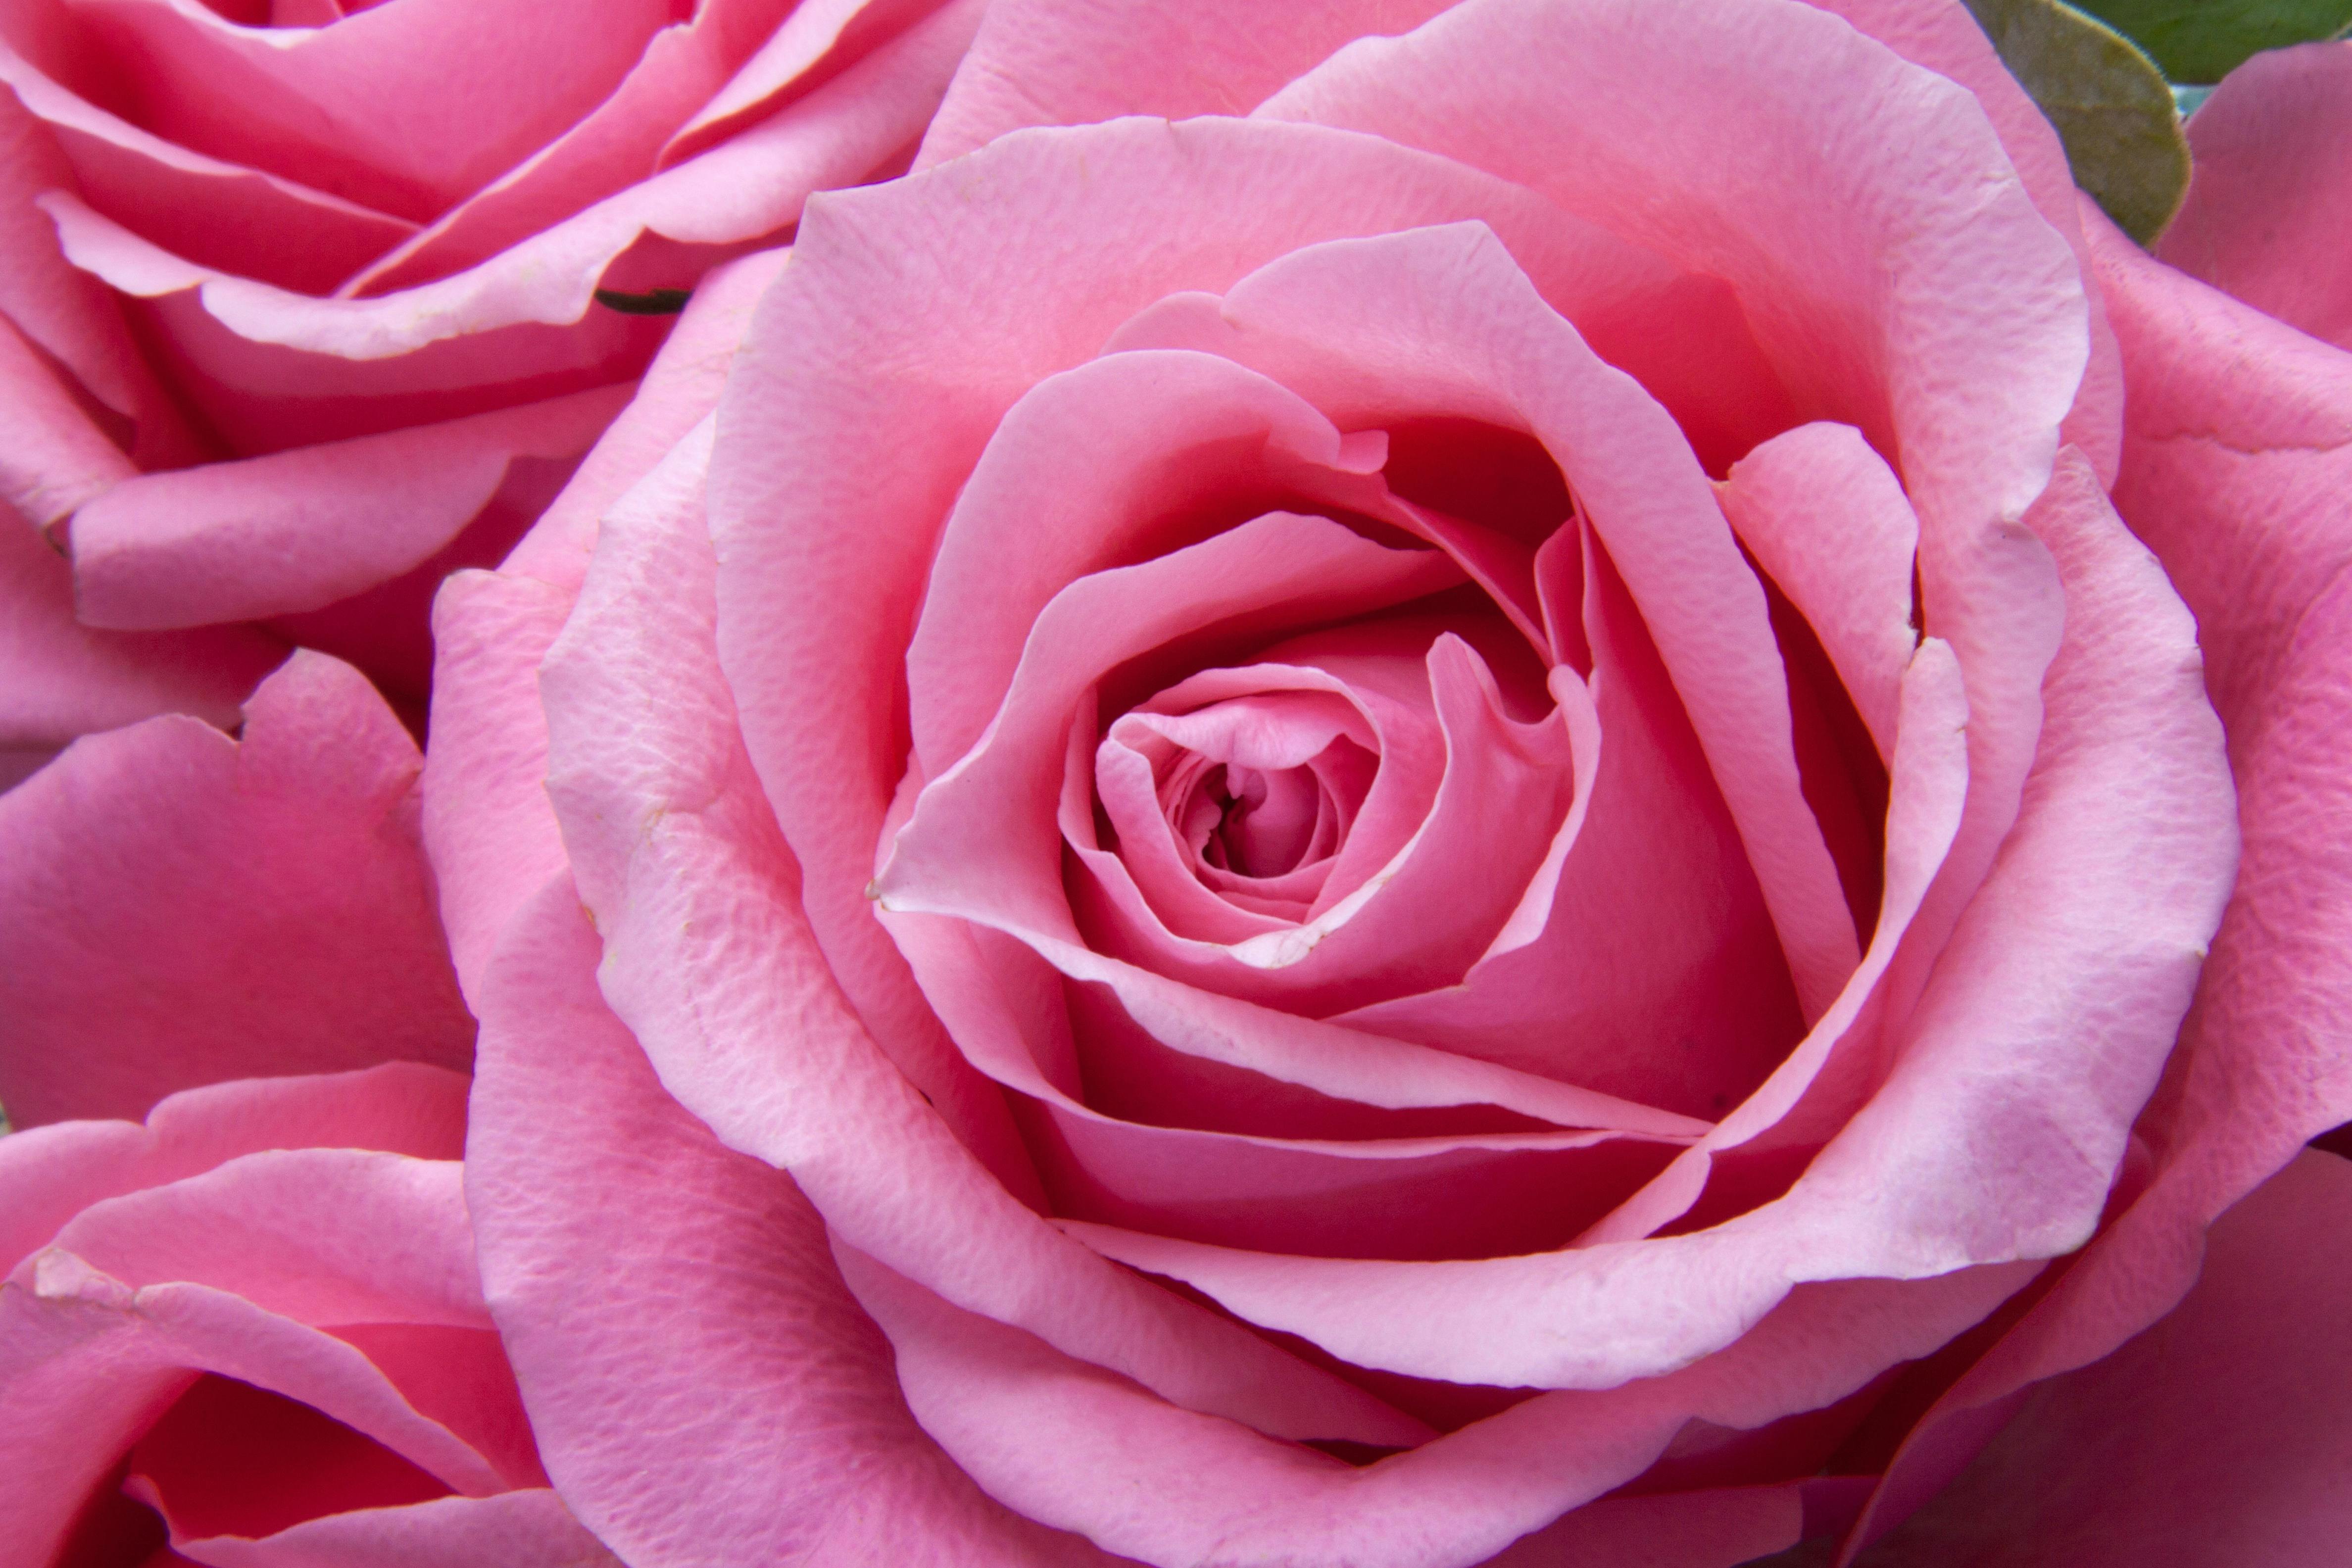 Details more than 70 background pink roses wallpaper best - in.cdgdbentre